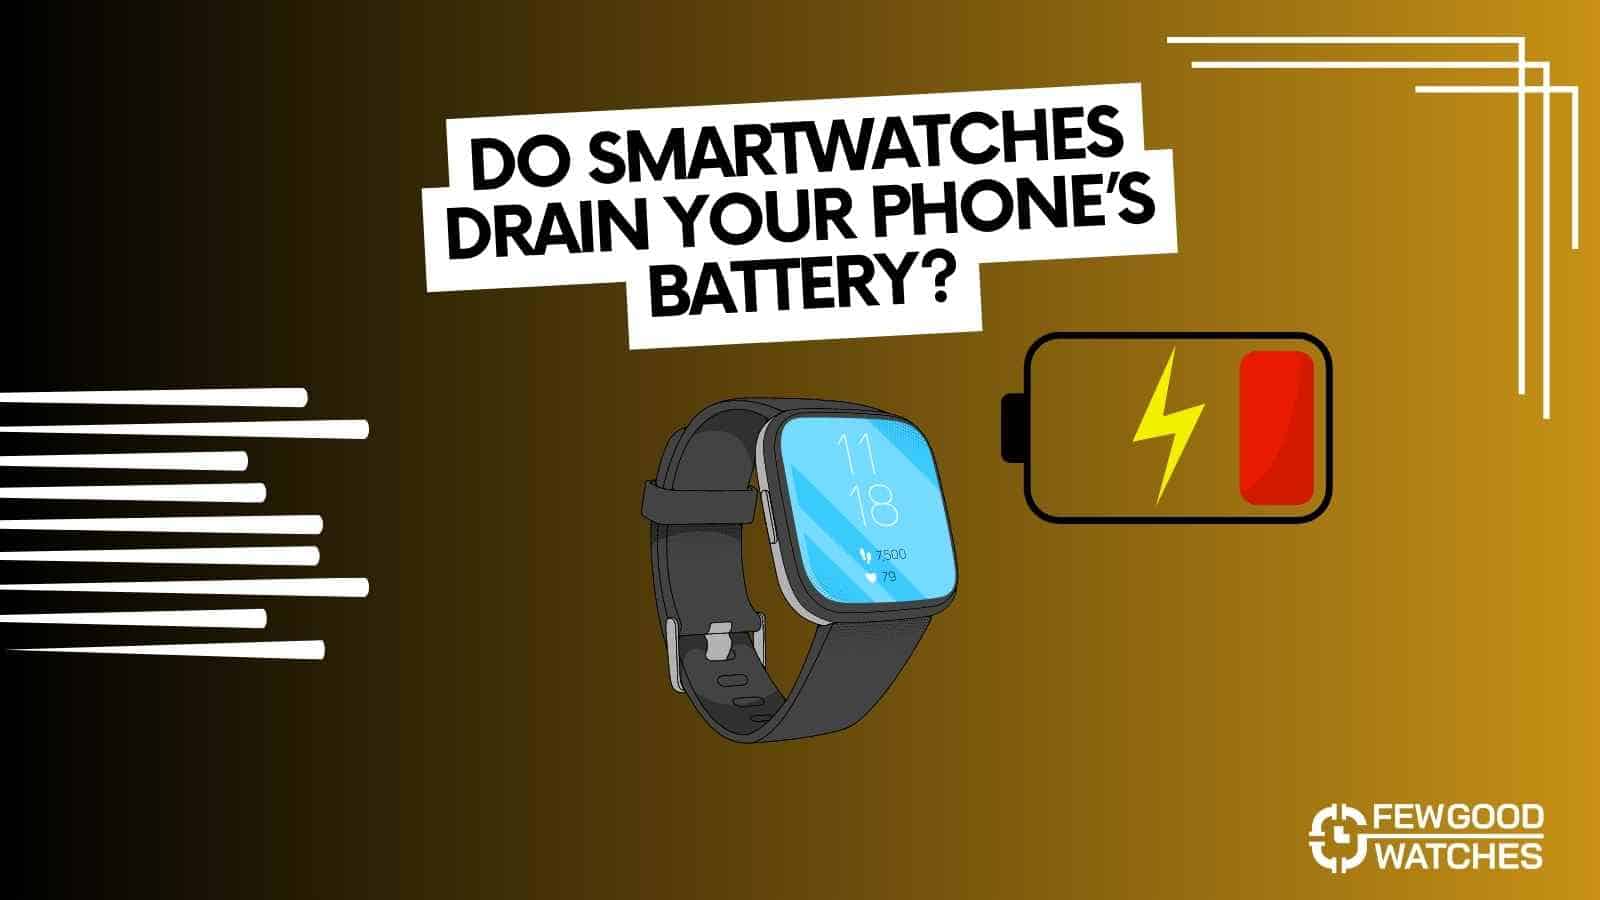 do smartwatches drain phone battery life - answered